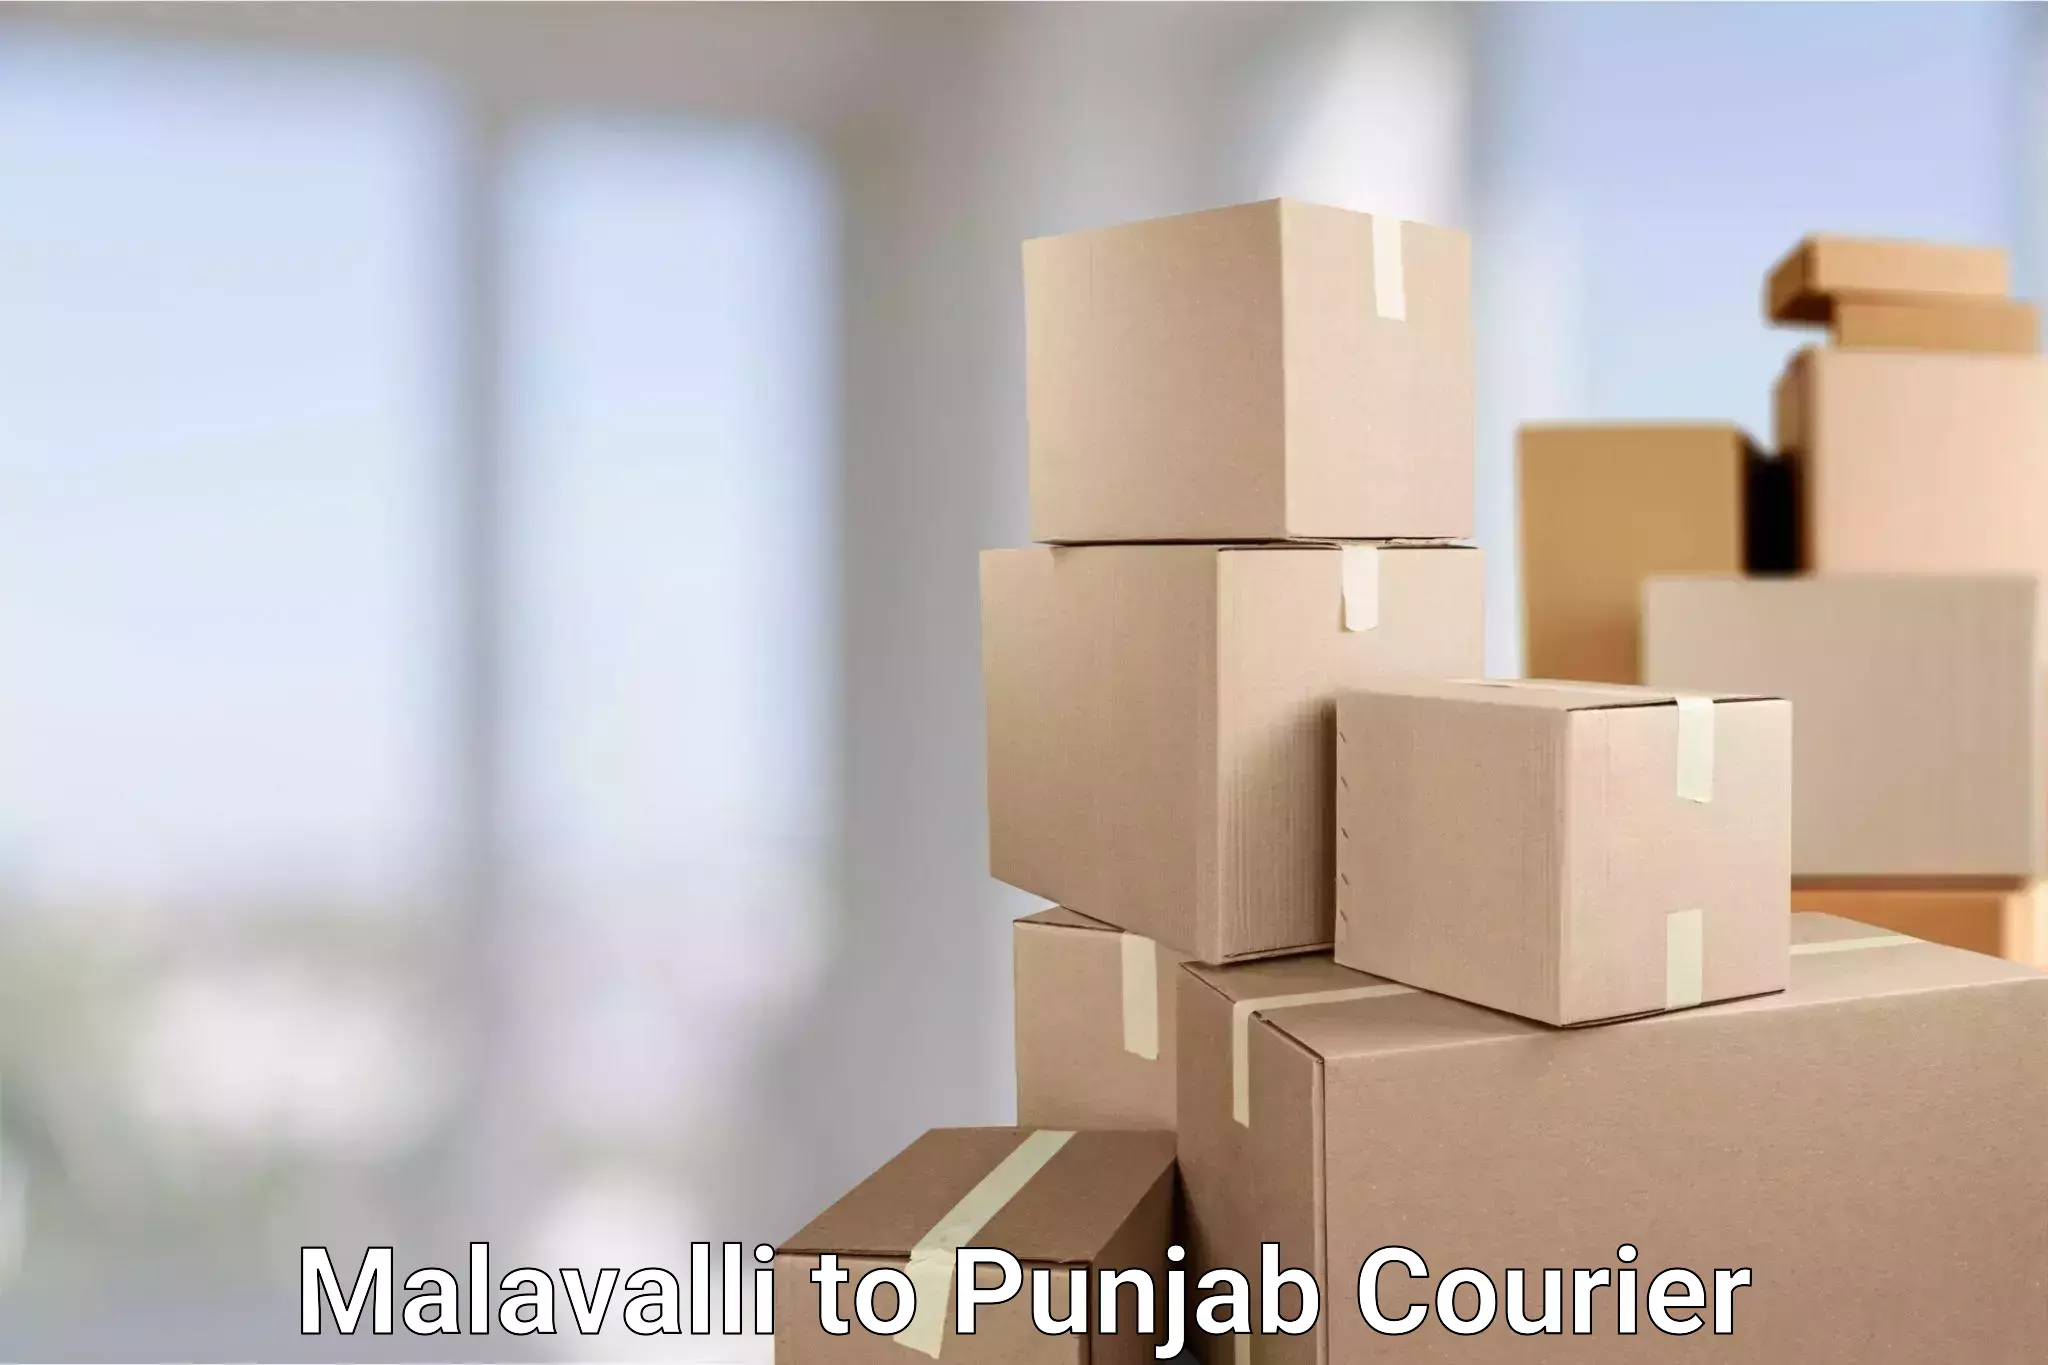 State-of-the-art courier technology Malavalli to Jalalabad